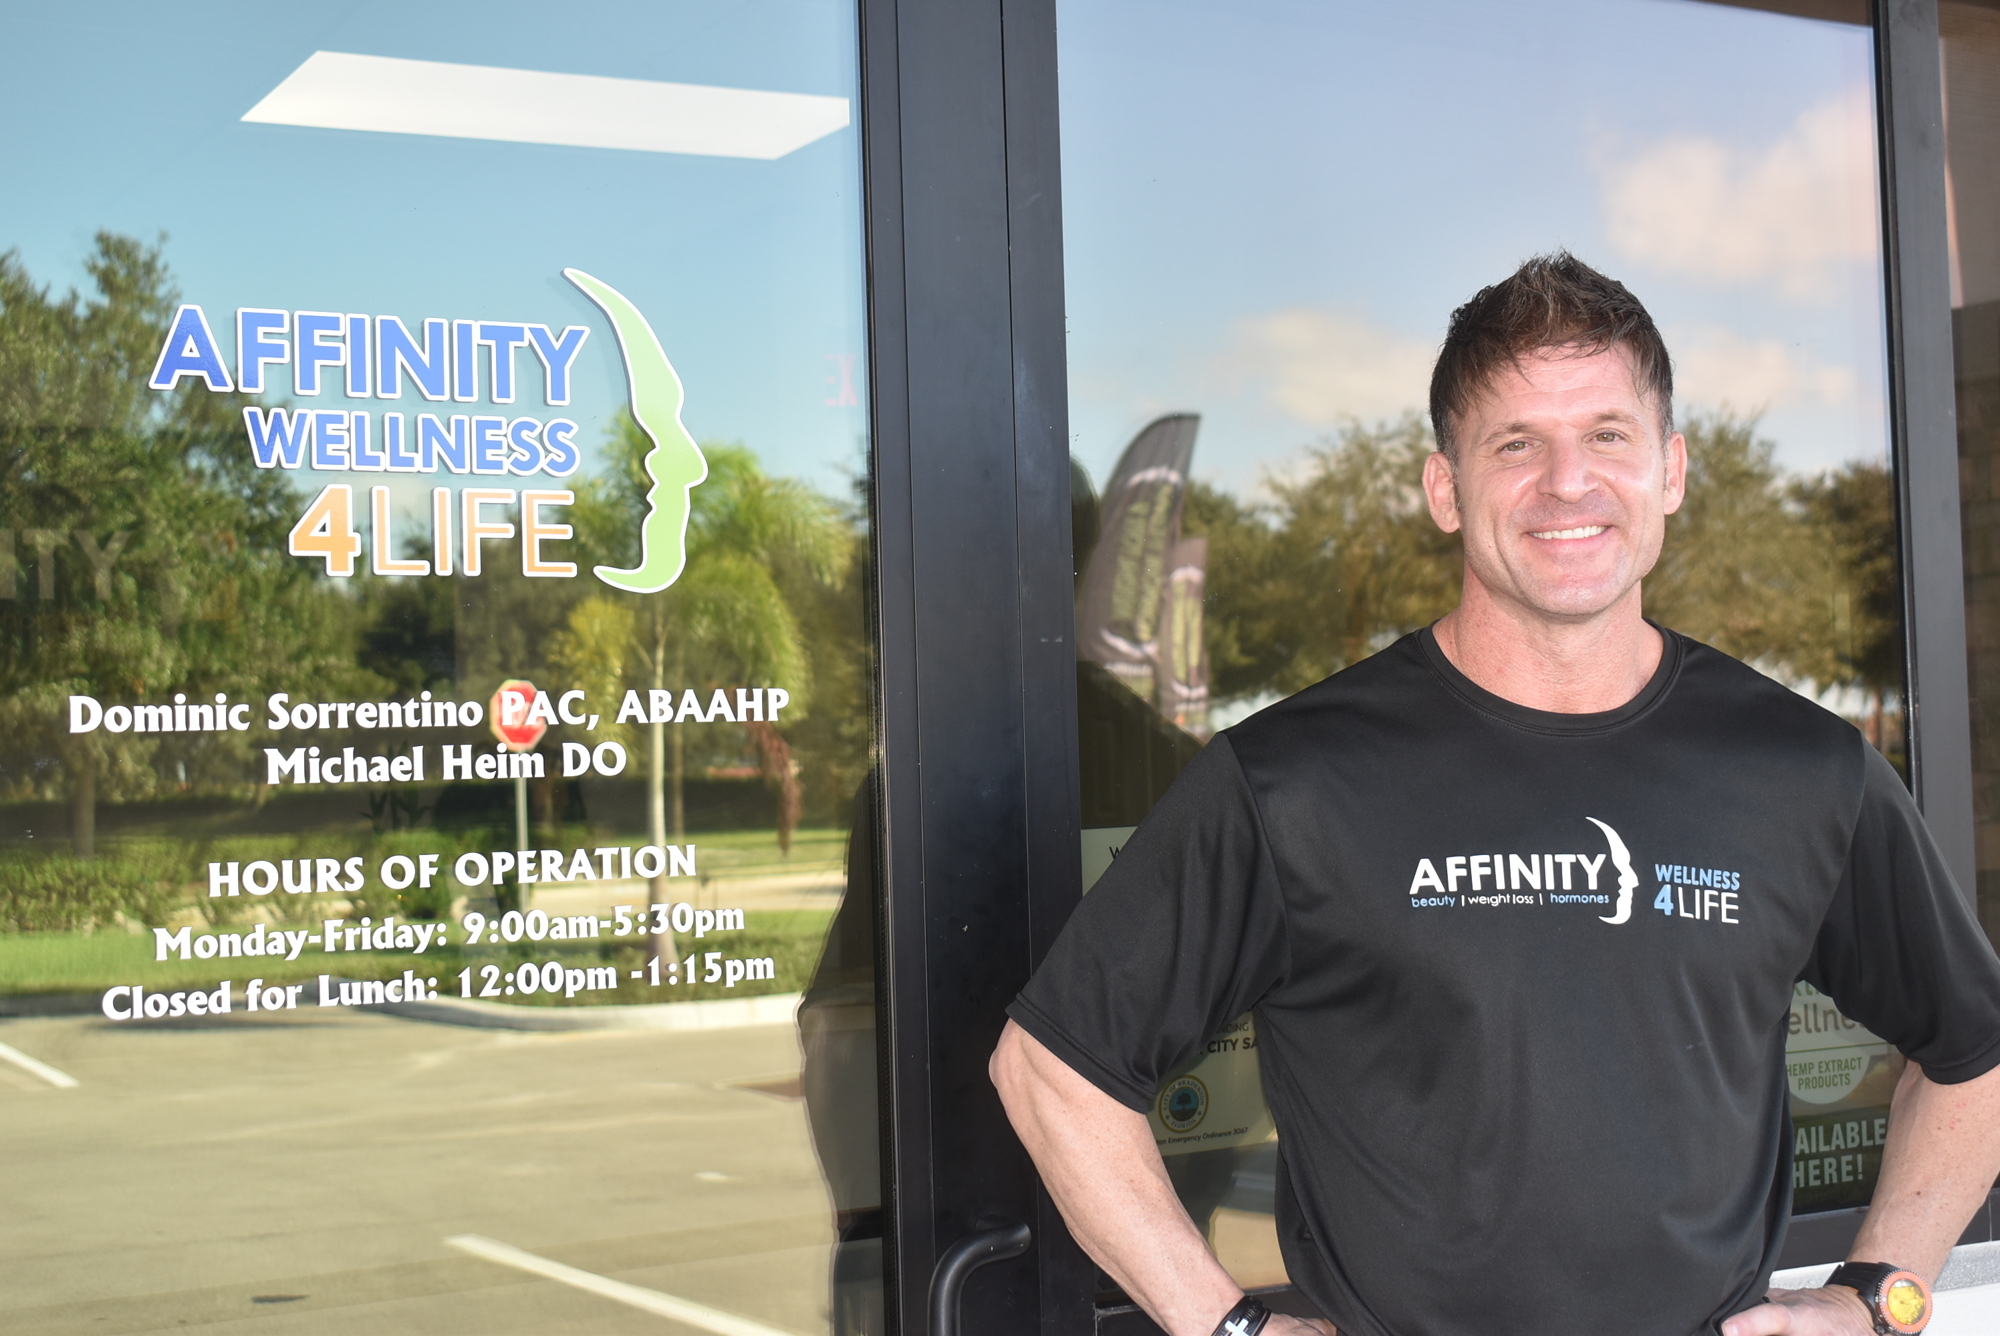 Affinity Wellness 4 Life owner Dominic Louis Sorrentino is a physician assistant with experience in fields from the emergency room to personal training to bodybuilding.